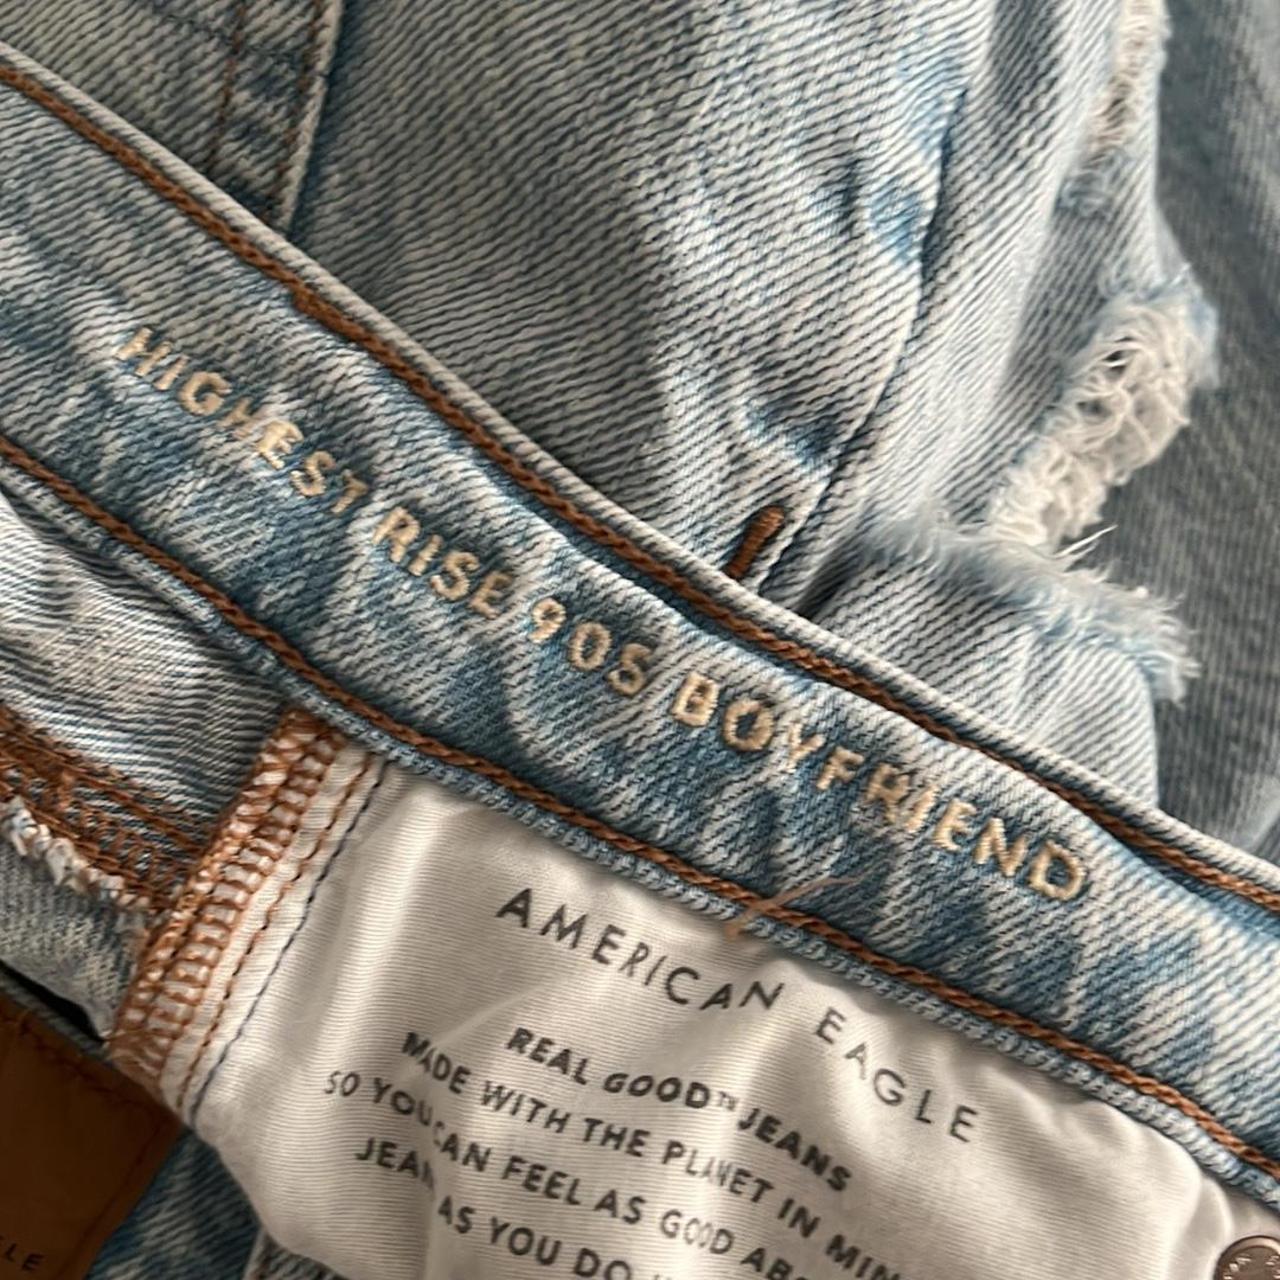 Real Good Jeans